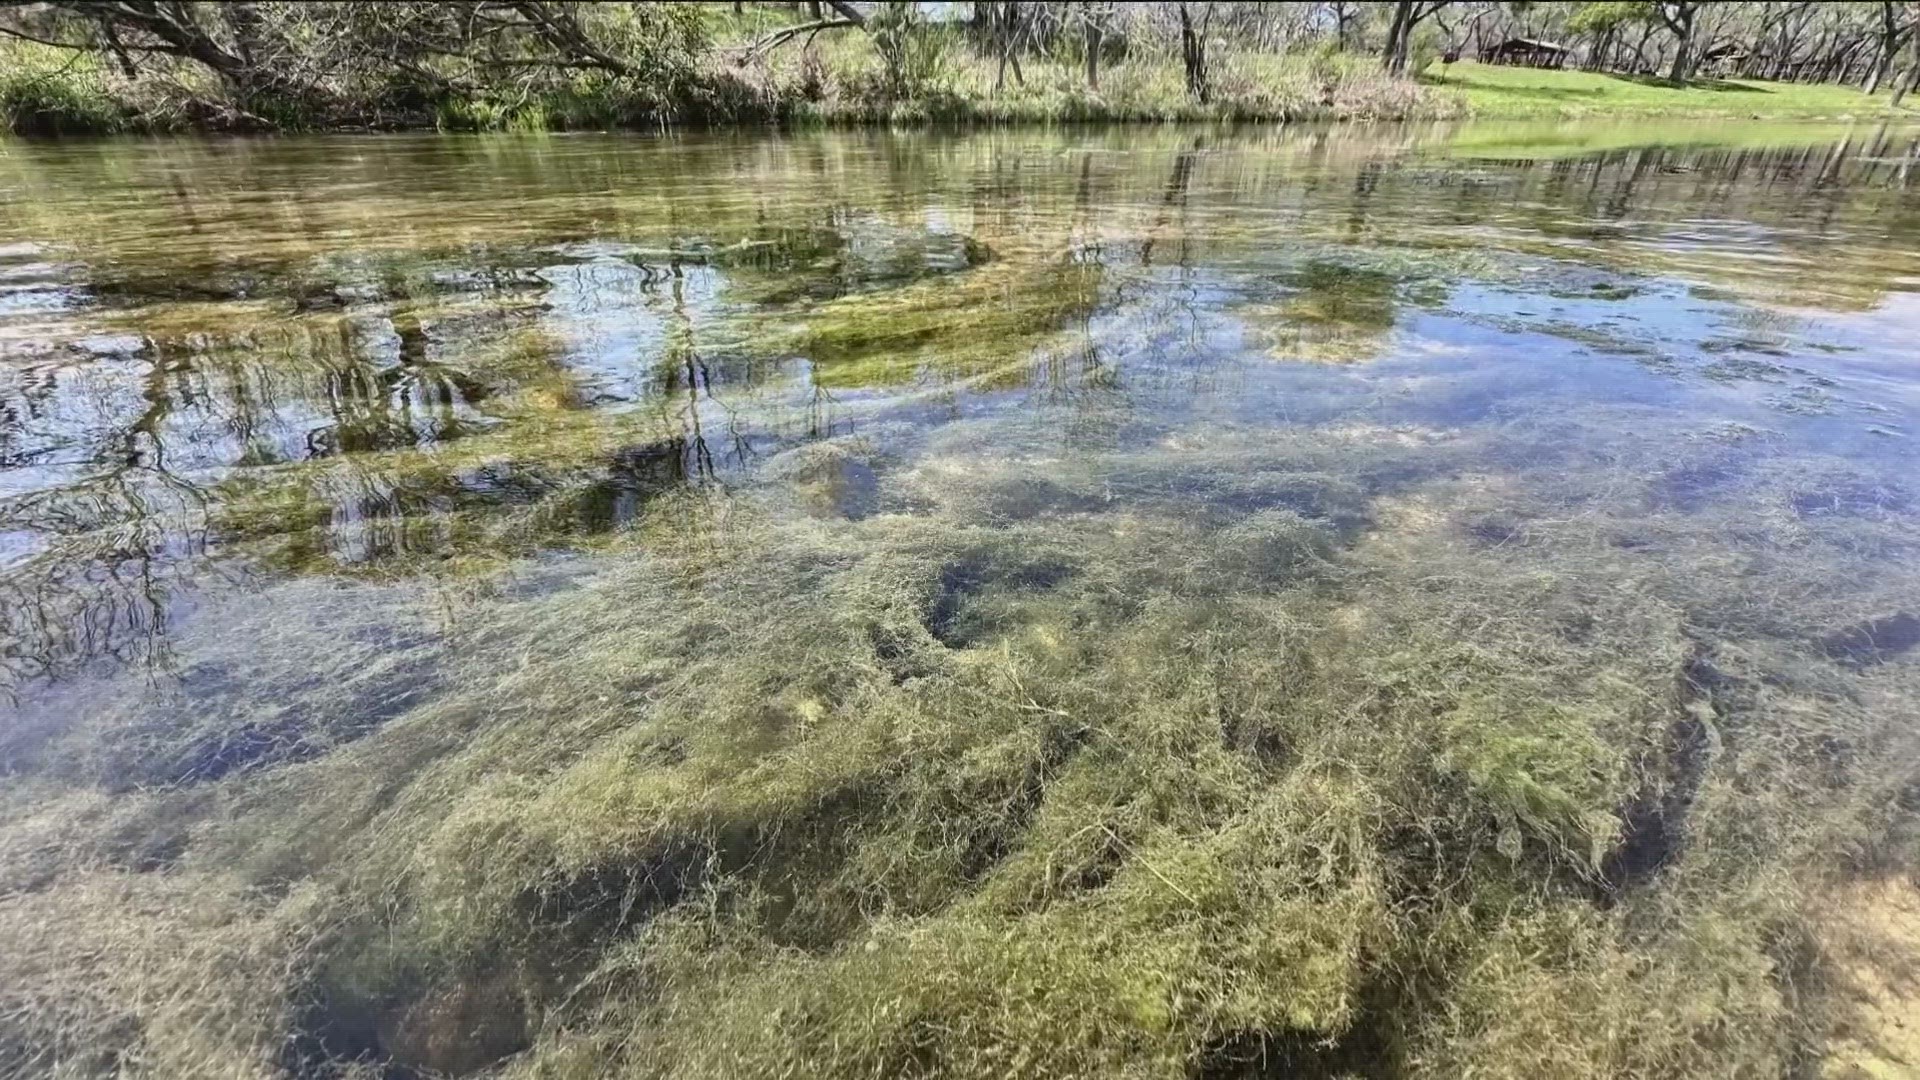 On Thursday, state environmental regulators weighed in on a years-long dispute involving the cause of excessive algae growth in the South San Gabriel River.